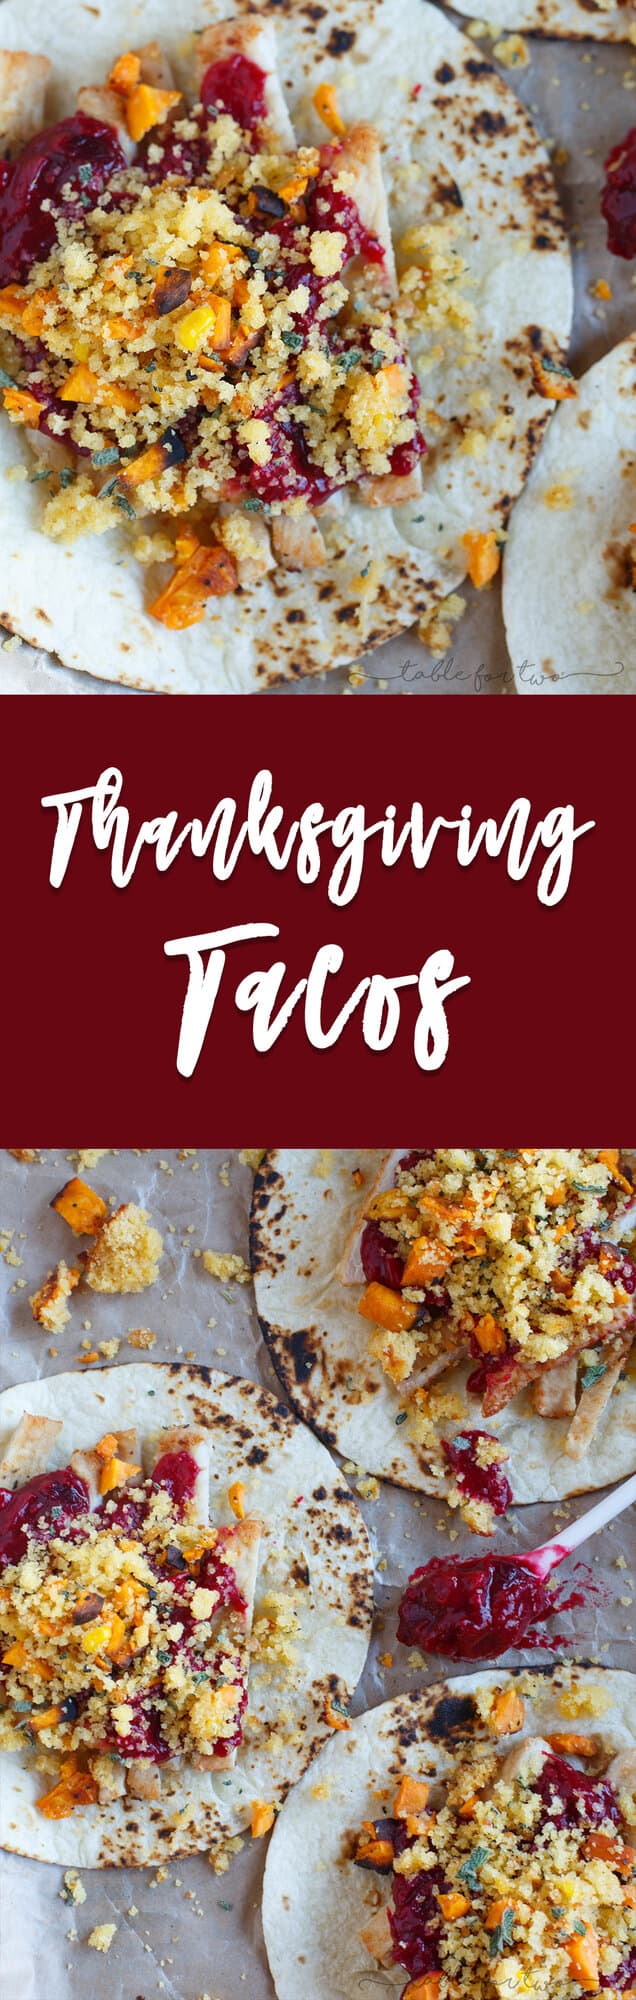 Need a fun, new way to eat your Thanksgiving day leftovers? Why not make Thanksgiving tacos?! Using whatever Thanksgiving leftovers you have, you can make this Thanksgiving taco however you want! Way more fun than eating leftovers off a plate!